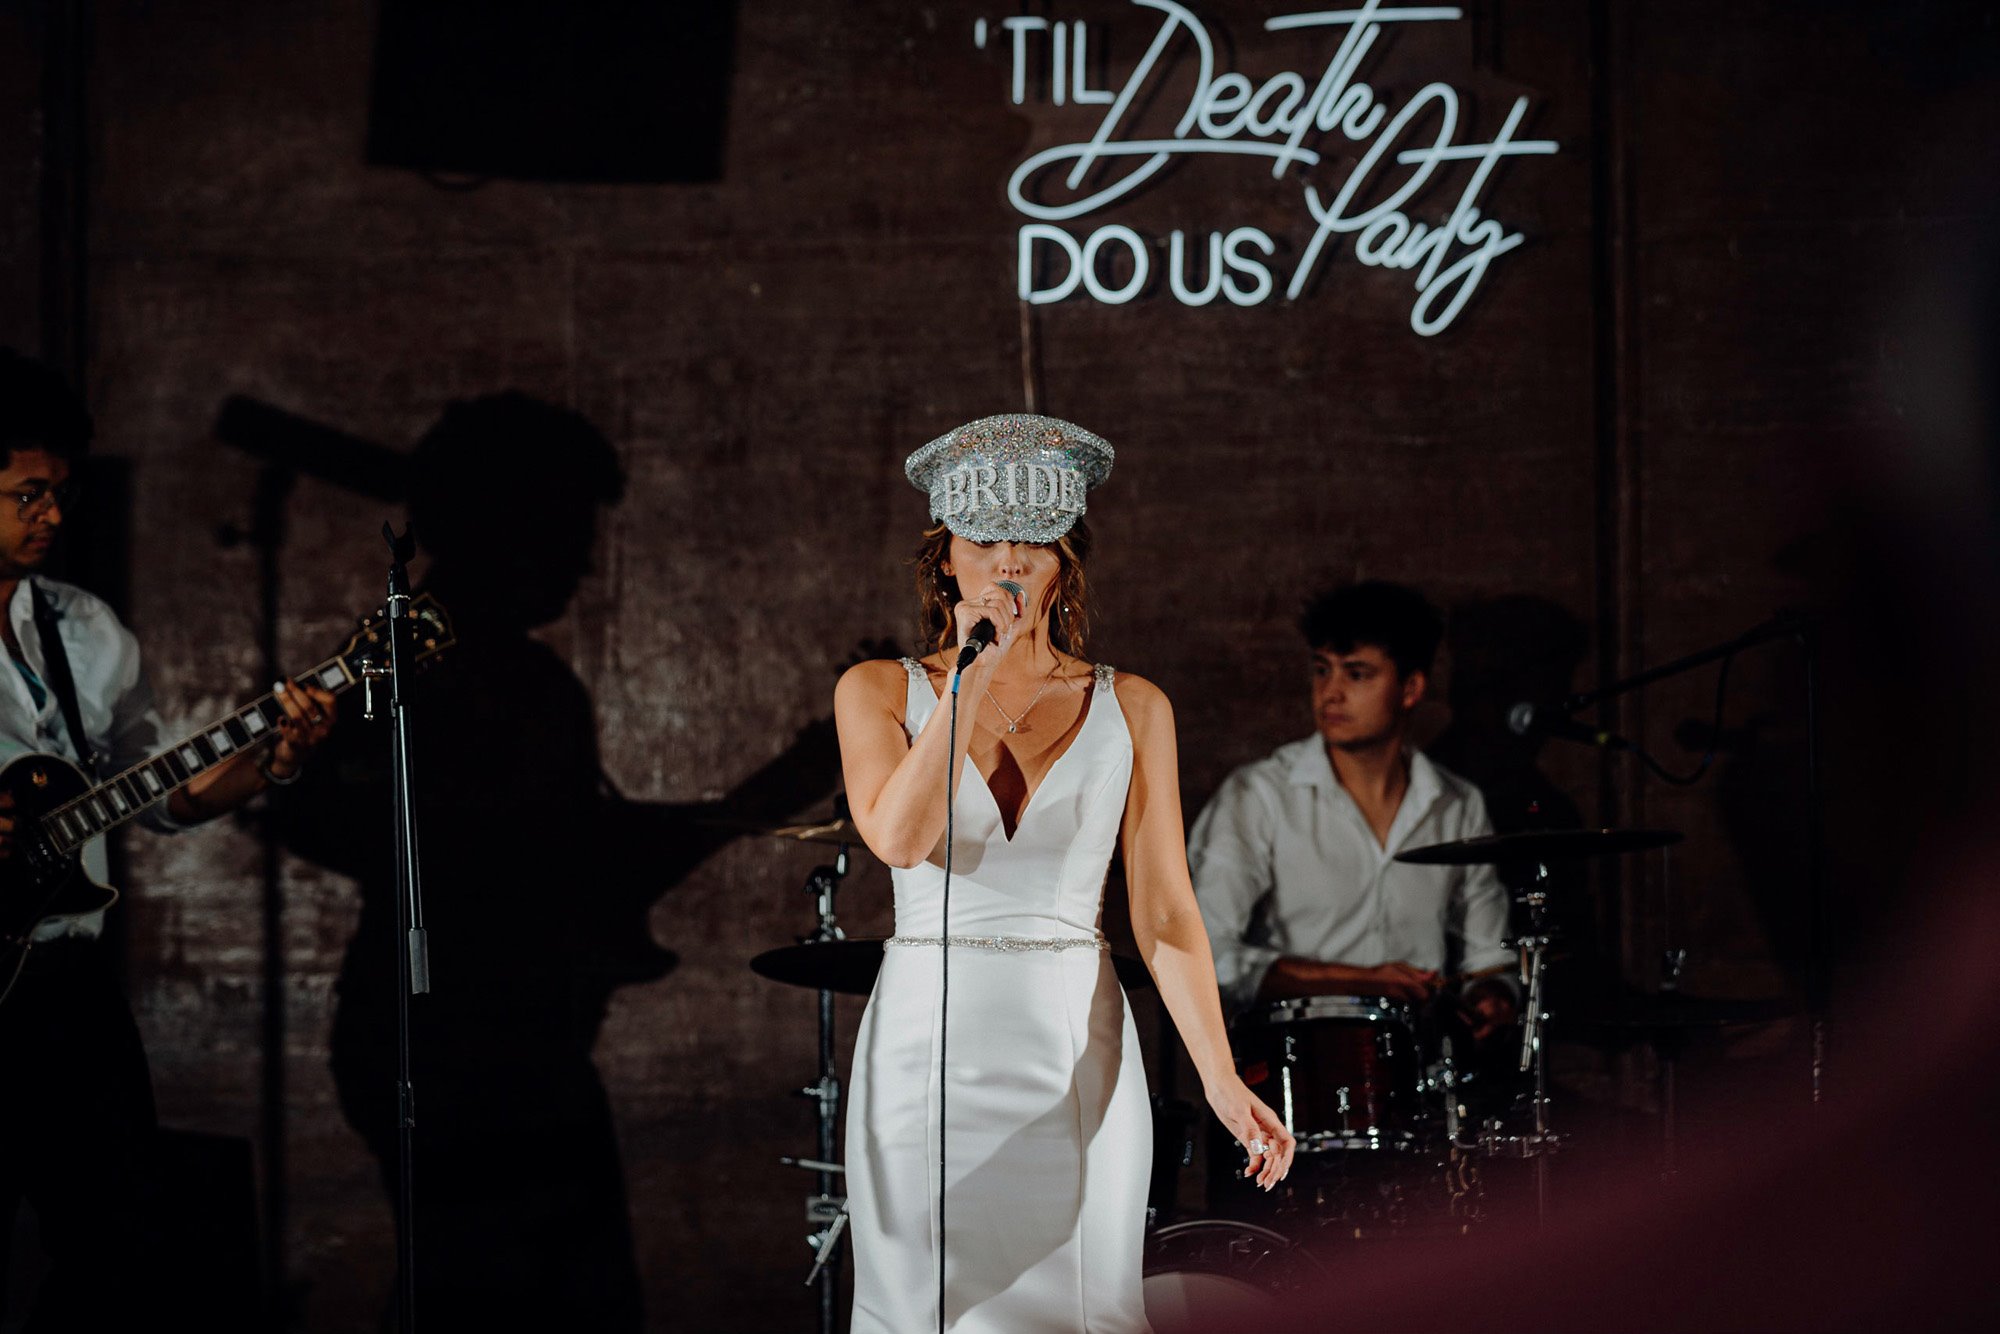 Rockstar bride on stage wearing sparkly hat with bride in pearls and death do us party sign at party wedding venue elmore court